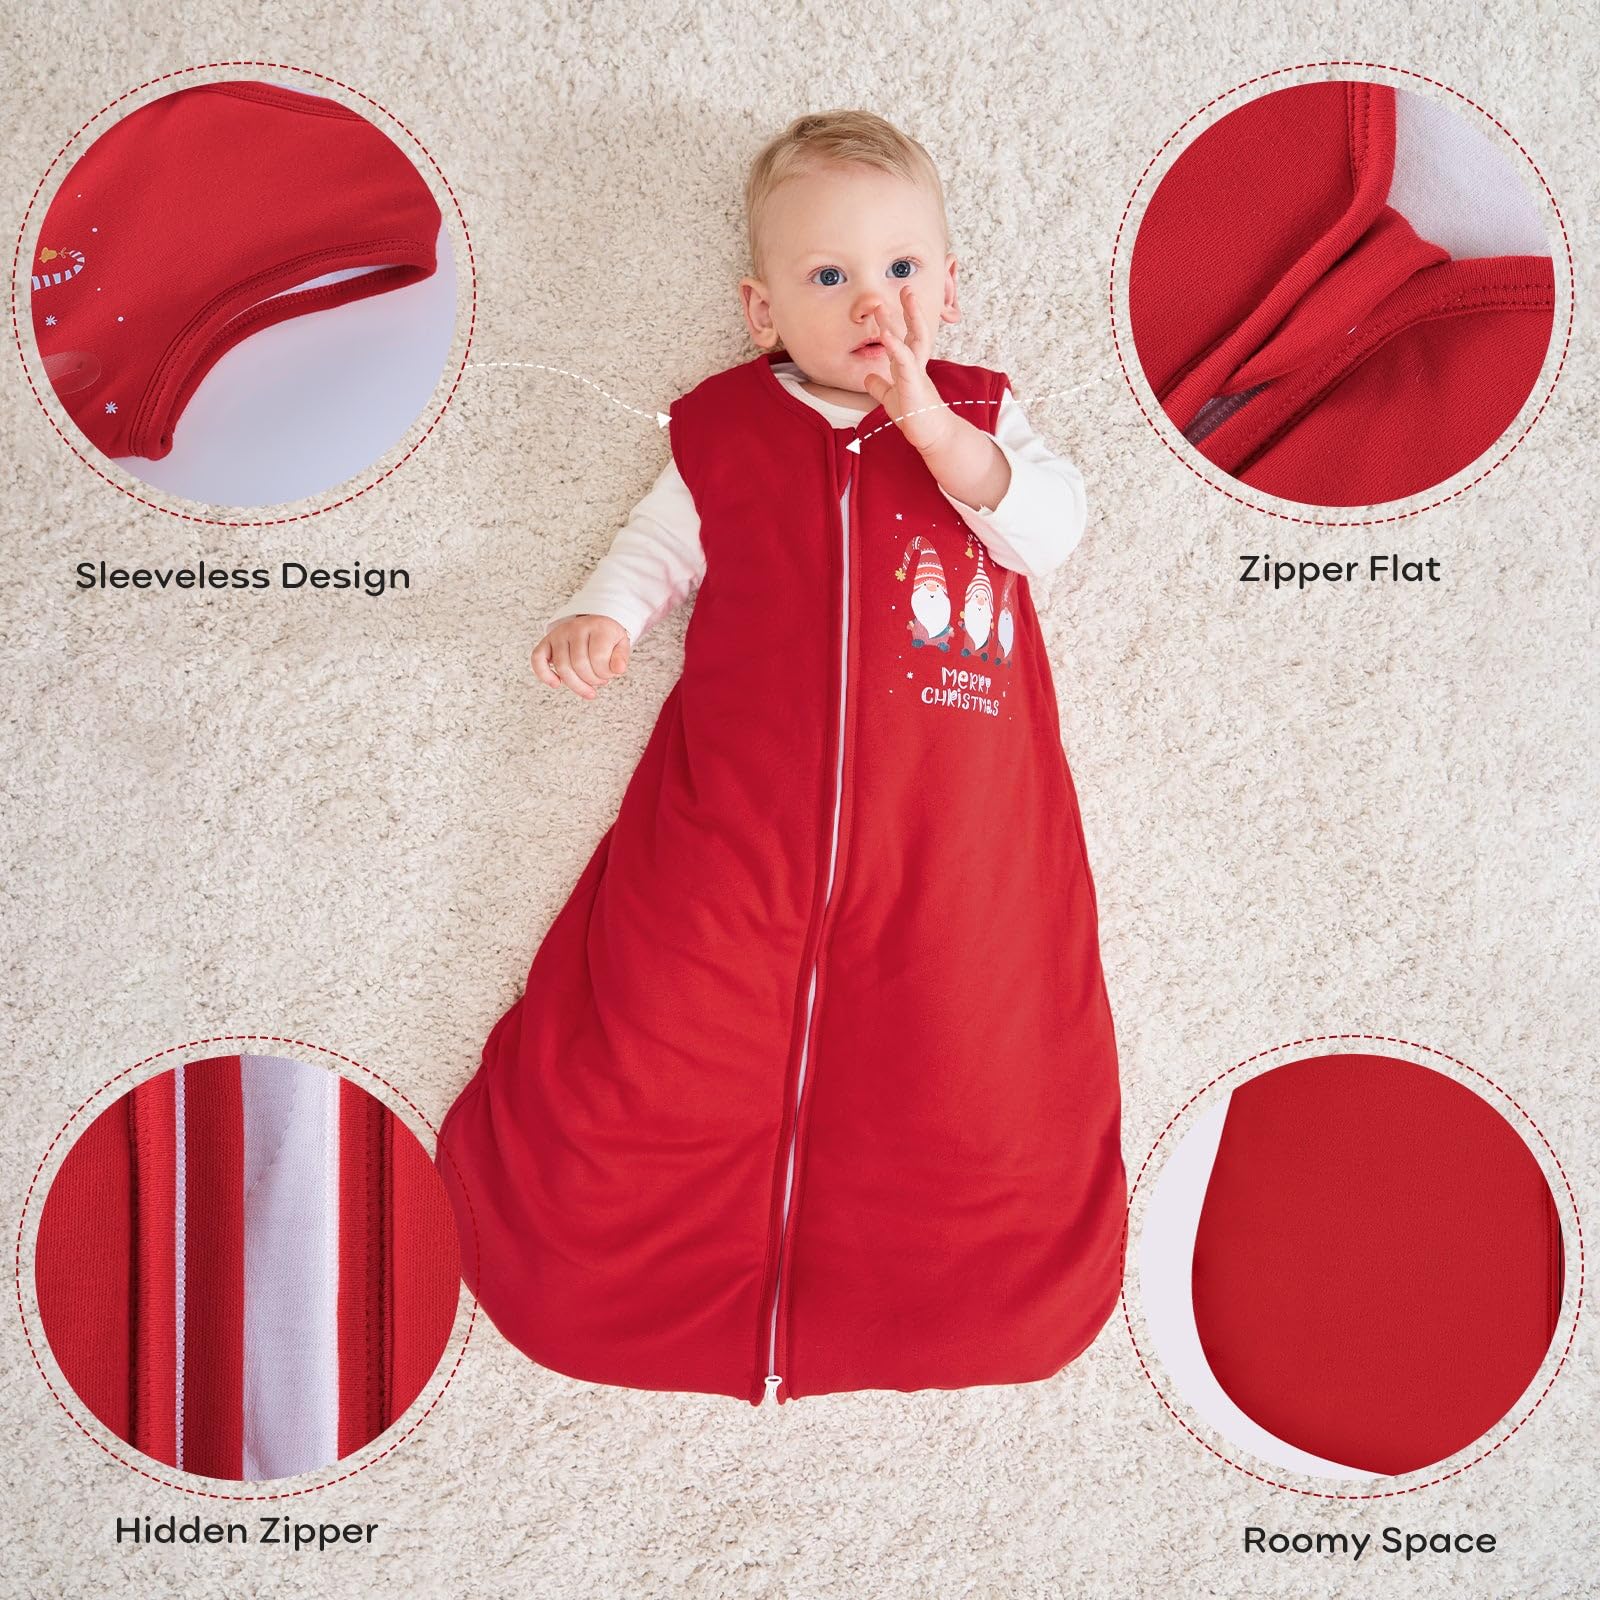 Yoofoss Baby Christams Sleep Sack, Winter TOG 2.5 Wearable Blanket for Baby with 2-Way Zipper, 100% Cotton Fabric